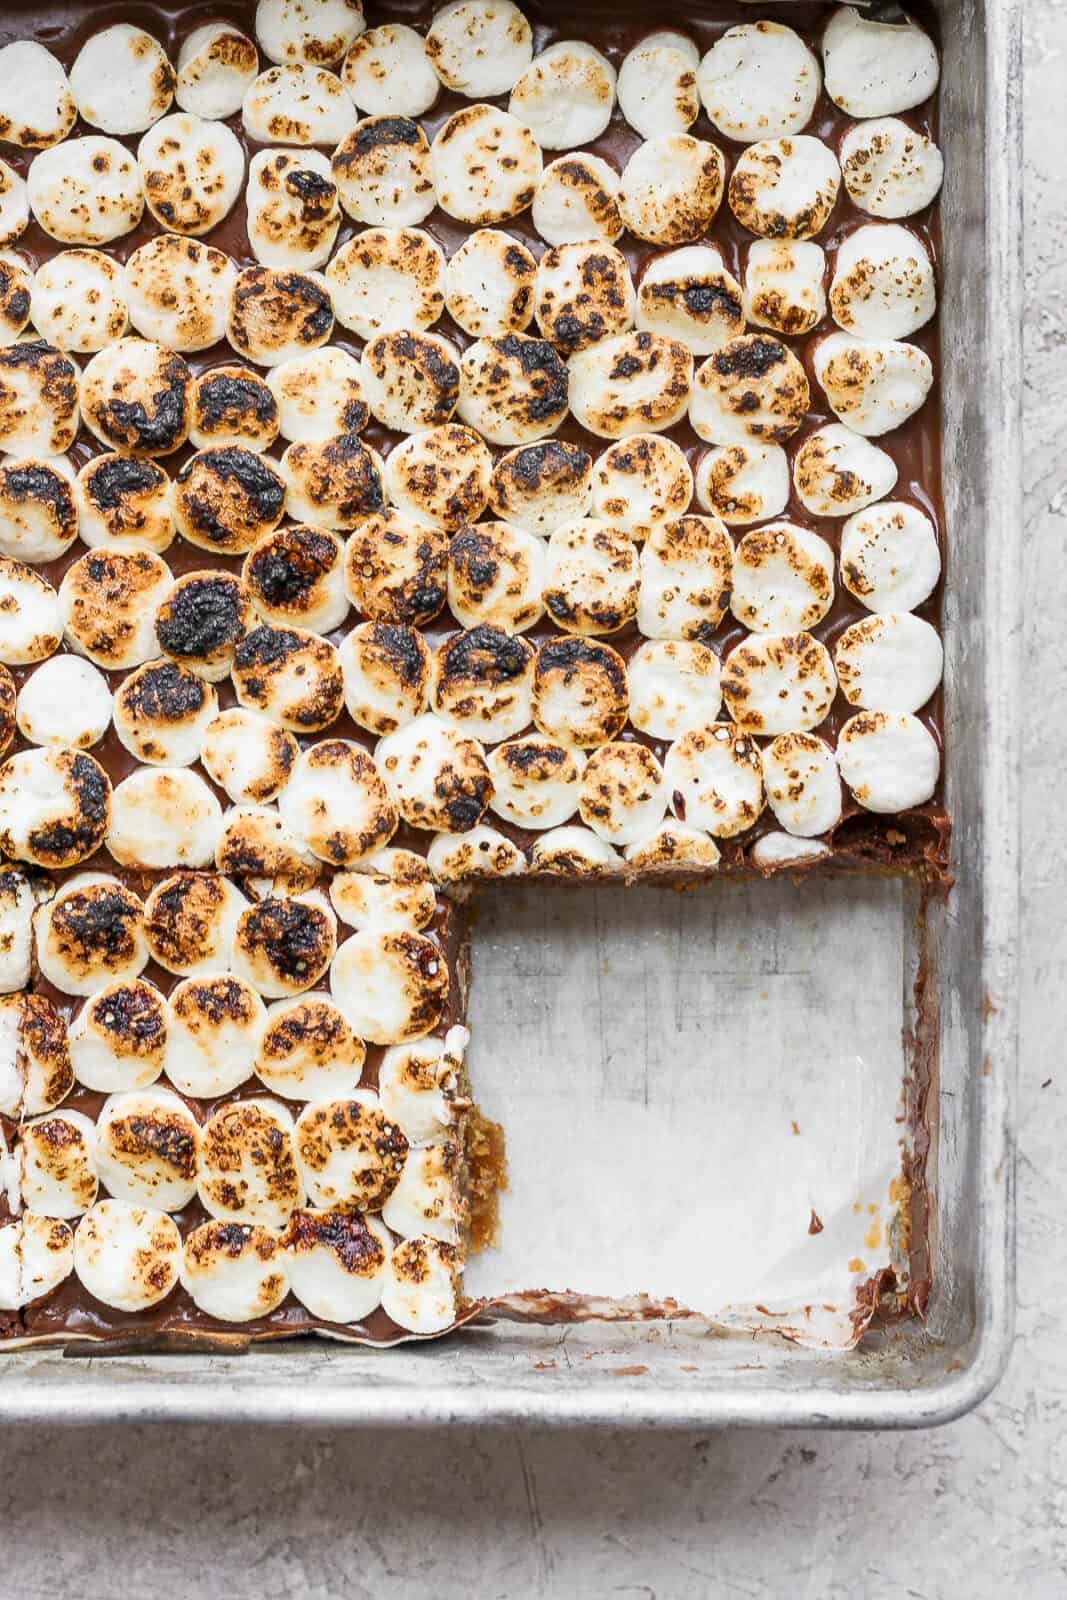 S'mores bars in the baking pan with one bar removed.